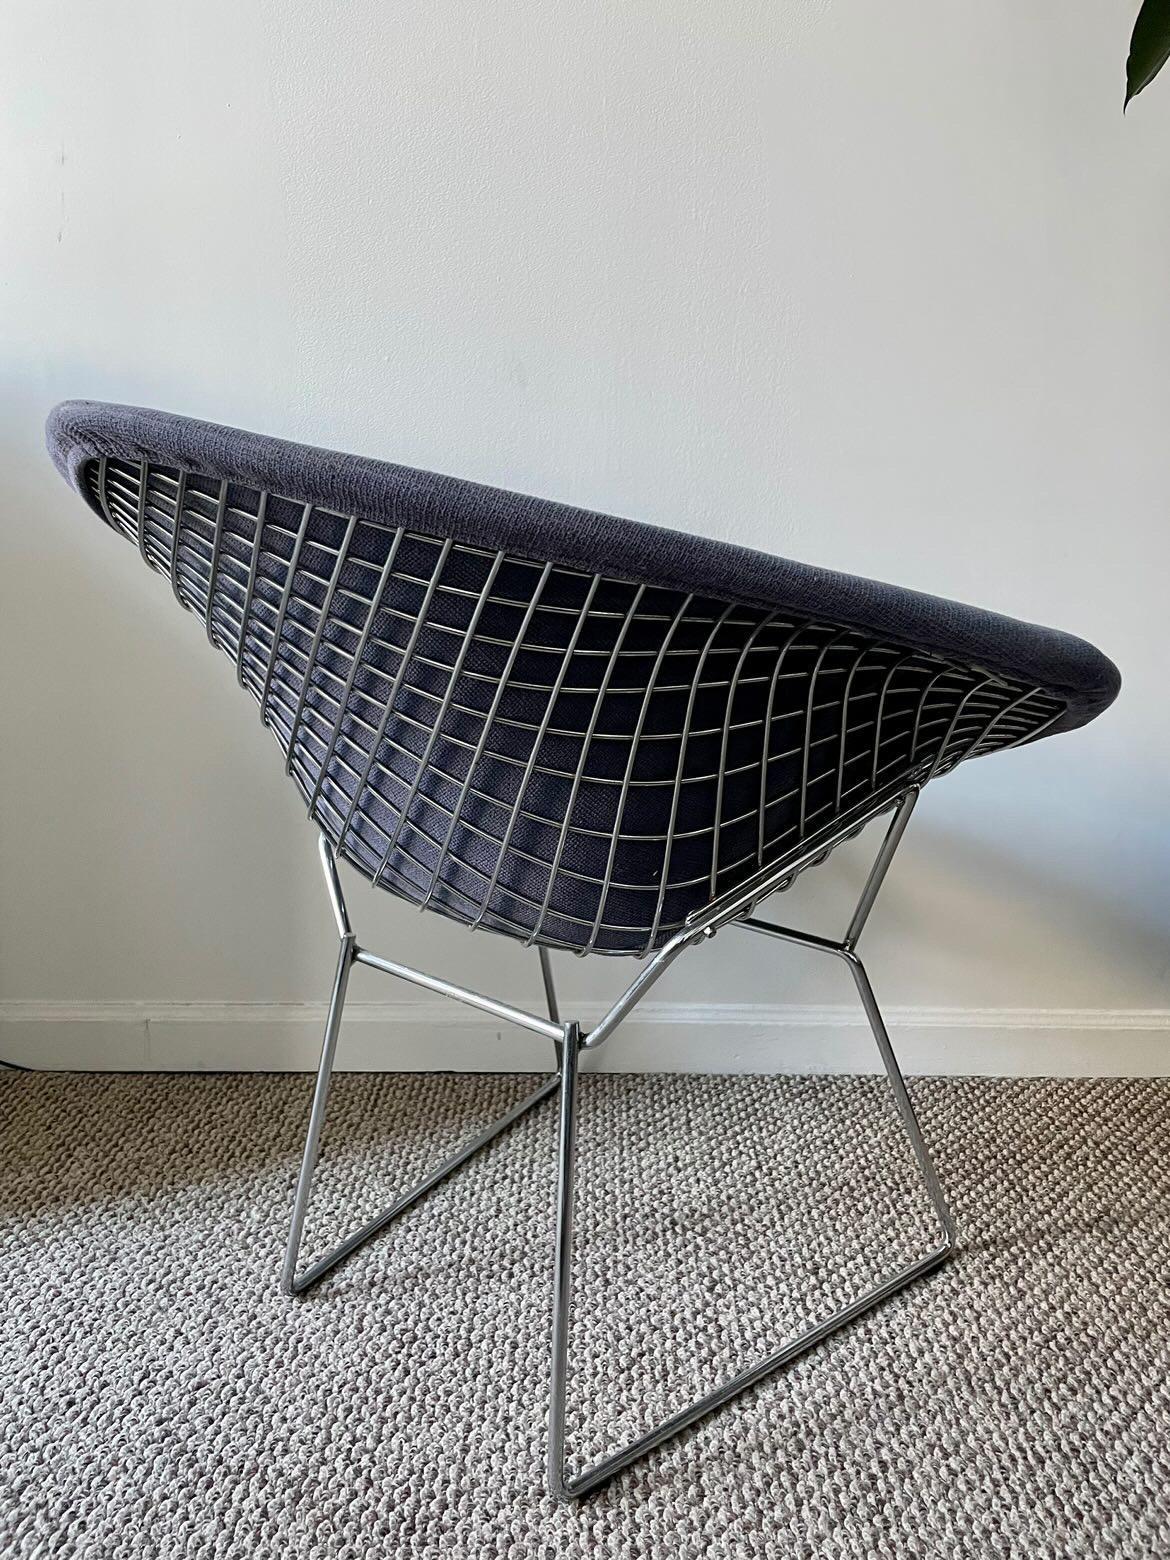 Diamond chair with full cover in lovely purple-grey upholstery. Labeled Knoll